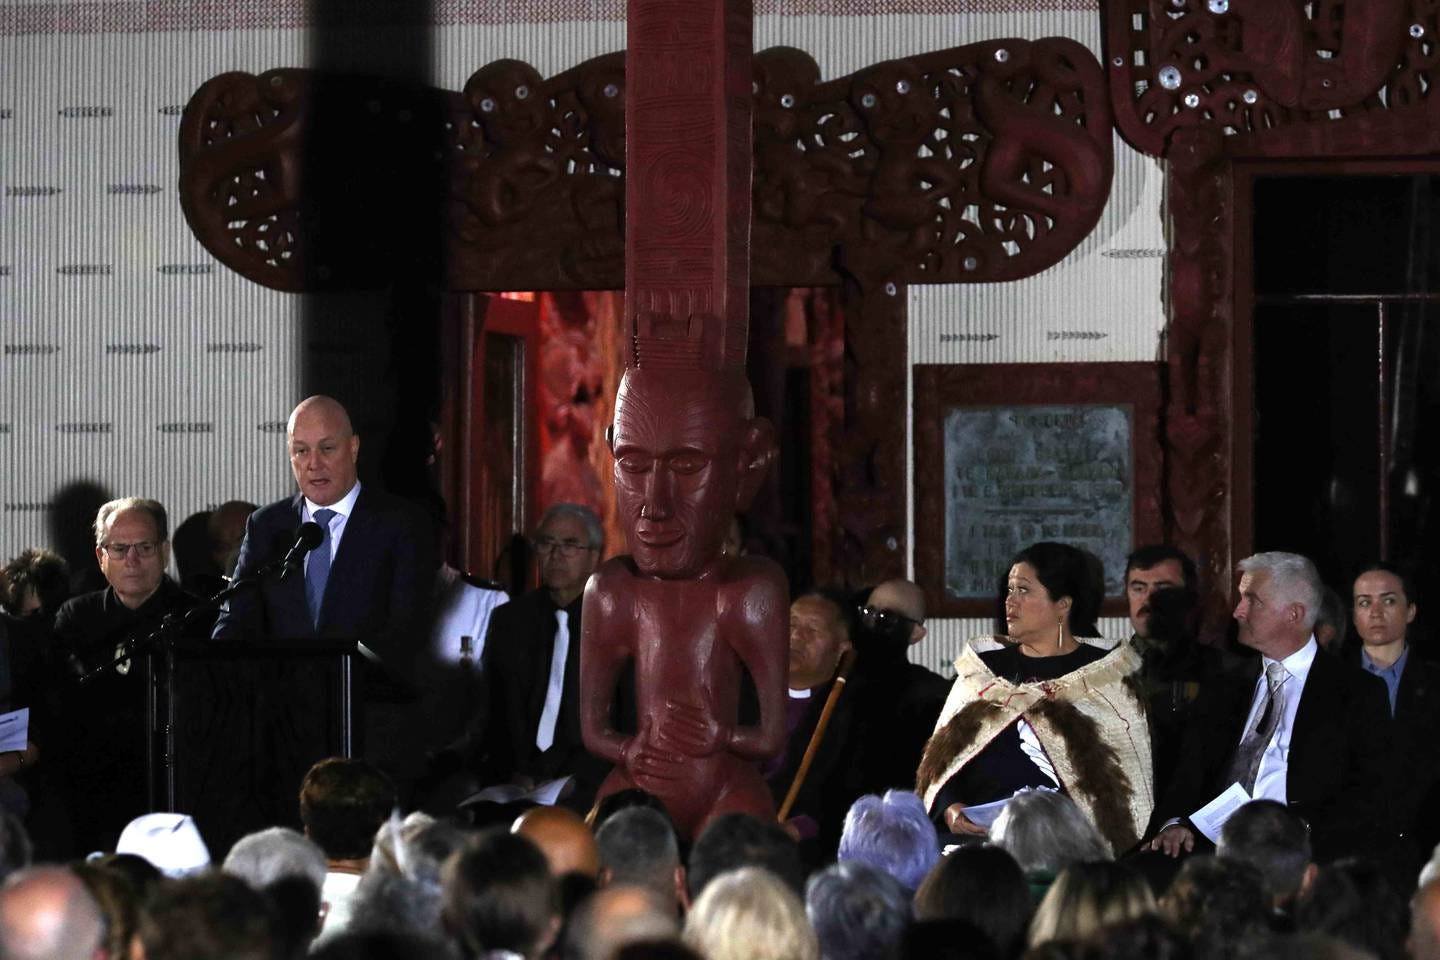 Prime Minister Christopher Luxon addresses the crowd at the Waitangi Day dawn ceremony. Photo / Michael Cunningham